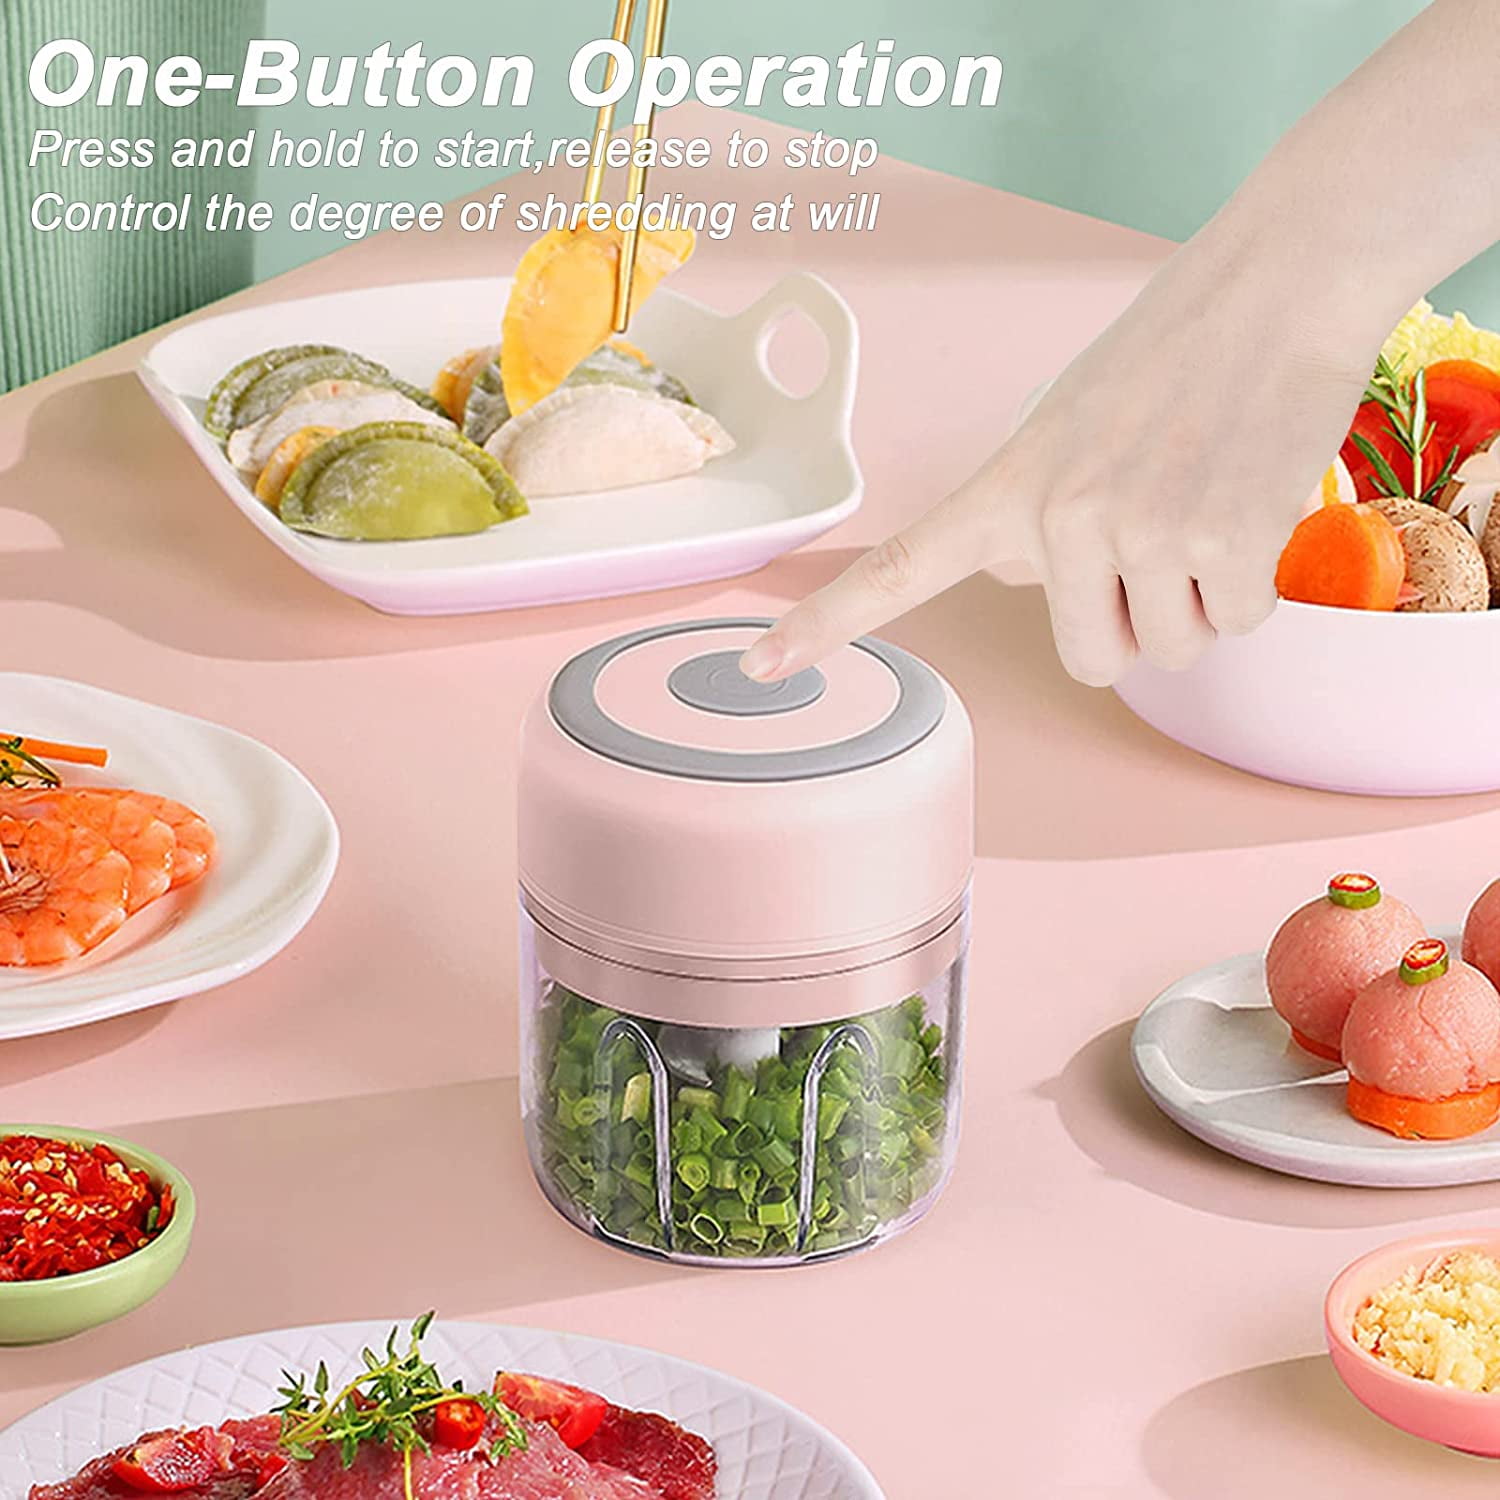 Sanrio Hello Kitty Electric Good Grinder Garlic Chopper Mini Portable Veggie  Chopper 250ML Masher Onion Chopper, Blender to Vegetable, Wireless Food  Processor for Ginger, Chili, Fruit, Meat, etc Inspired by You.